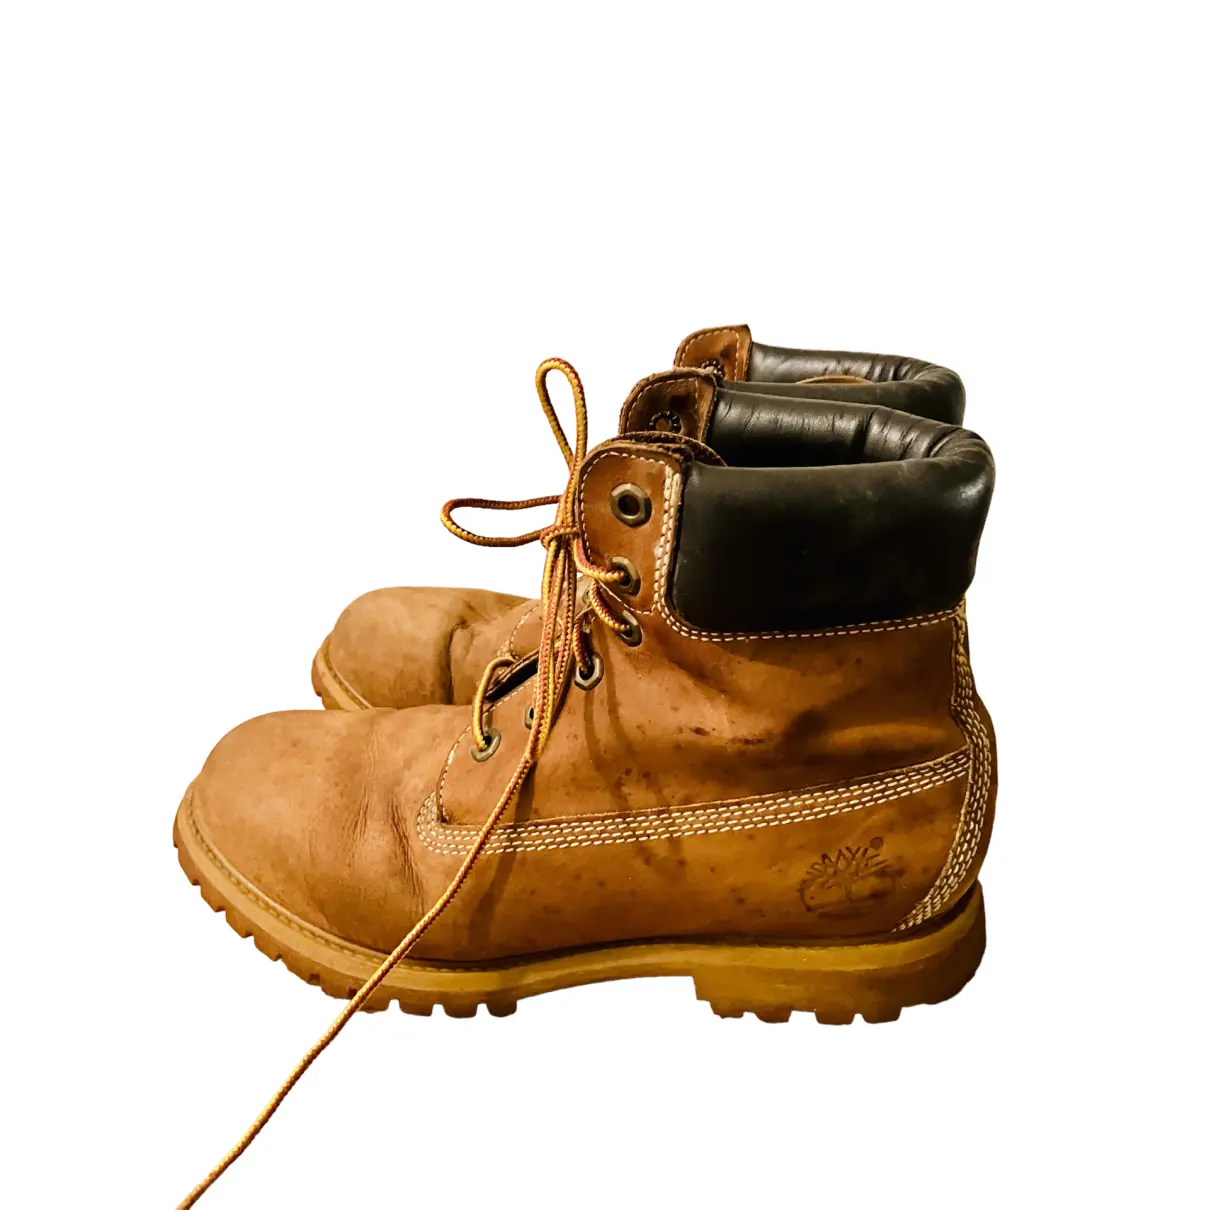 Luxury Timberland Ankle boots Women